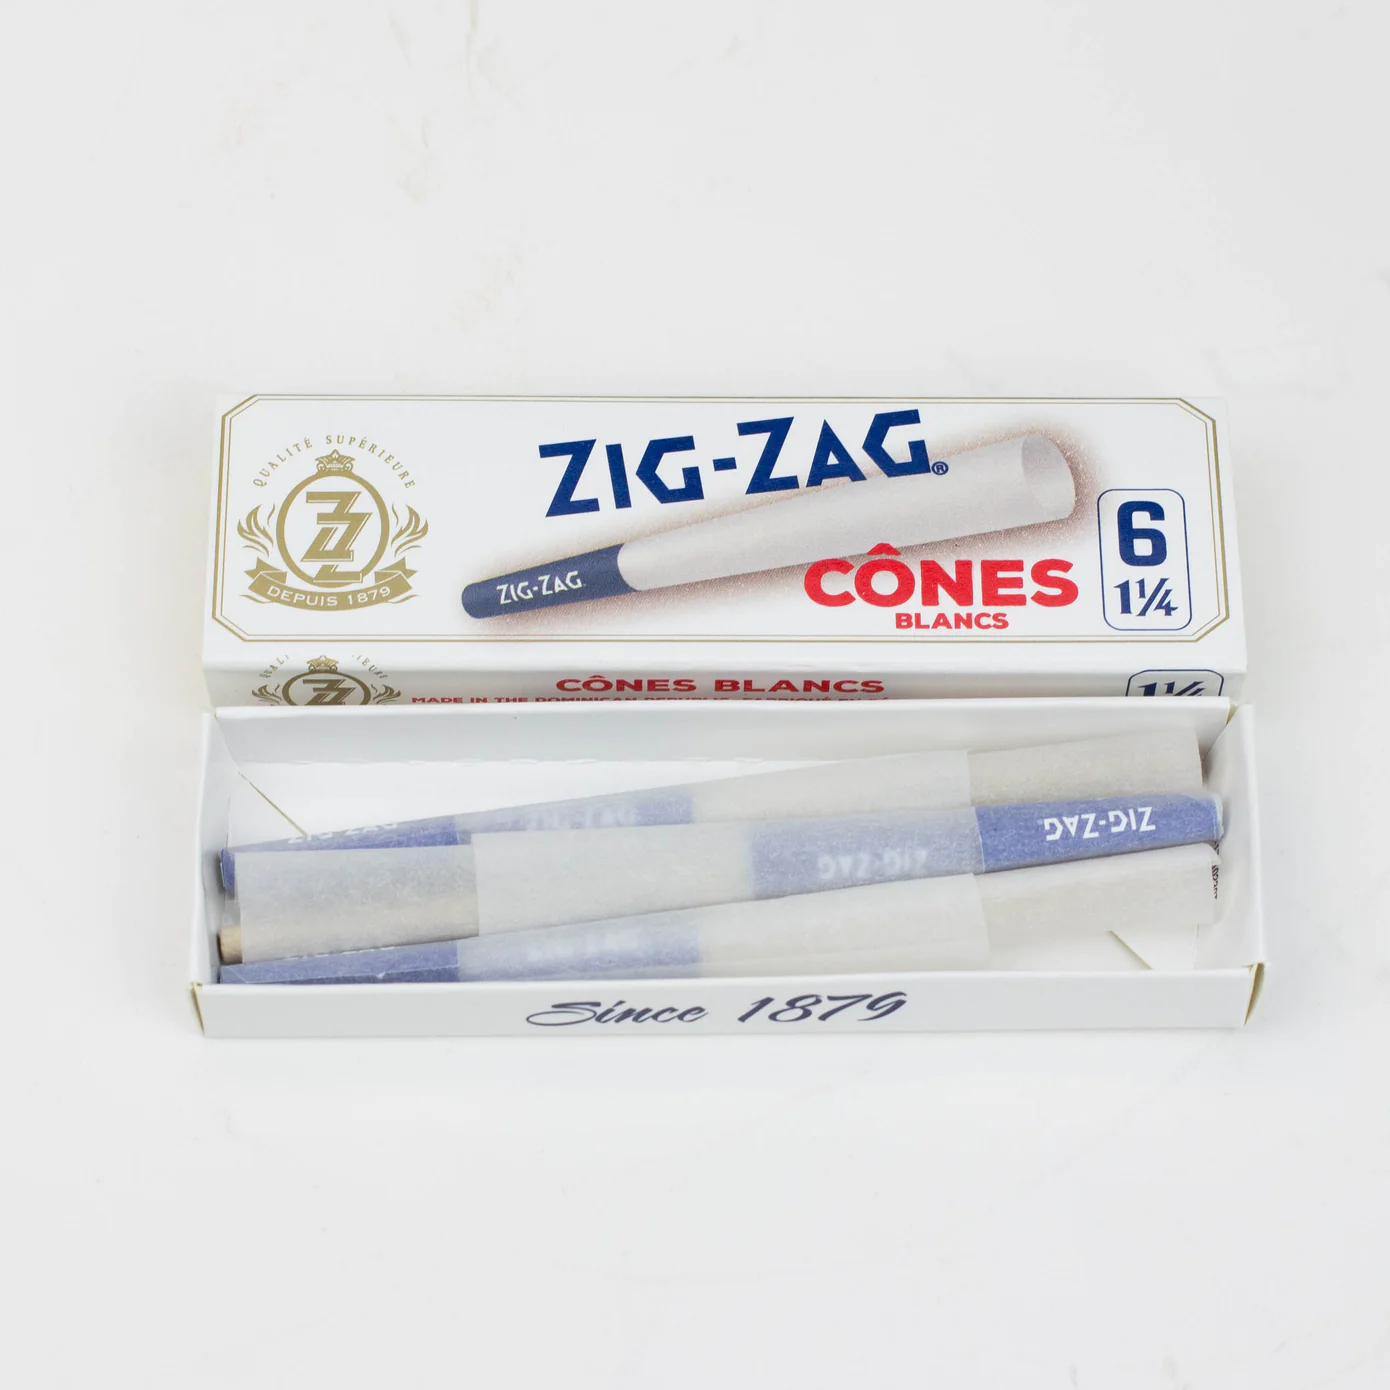 Pre-Rolled Cones – Zig-Zag White 1 1/4 Papers